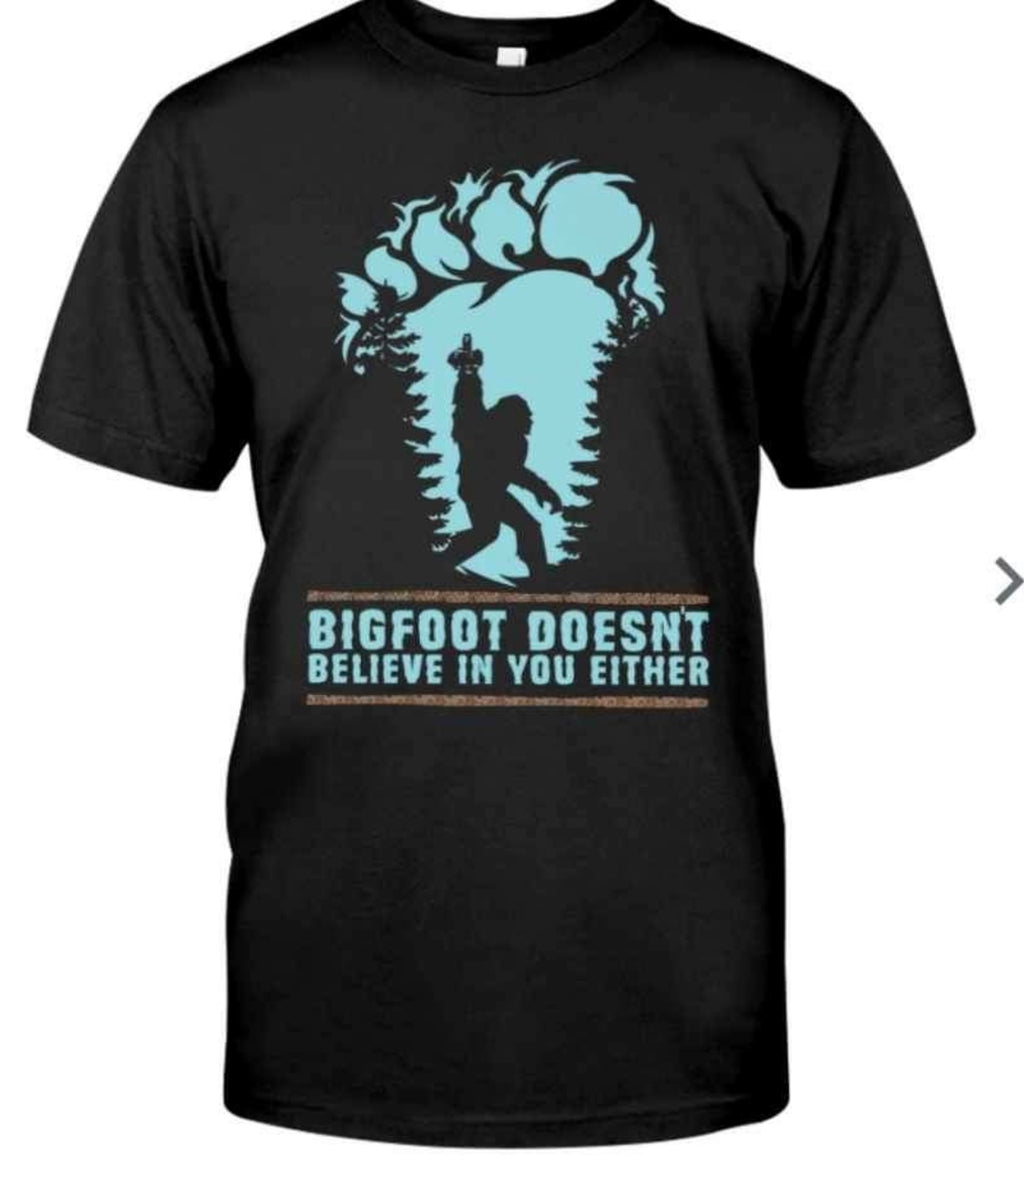 Bigfoot Doesn’t Believe in You Either